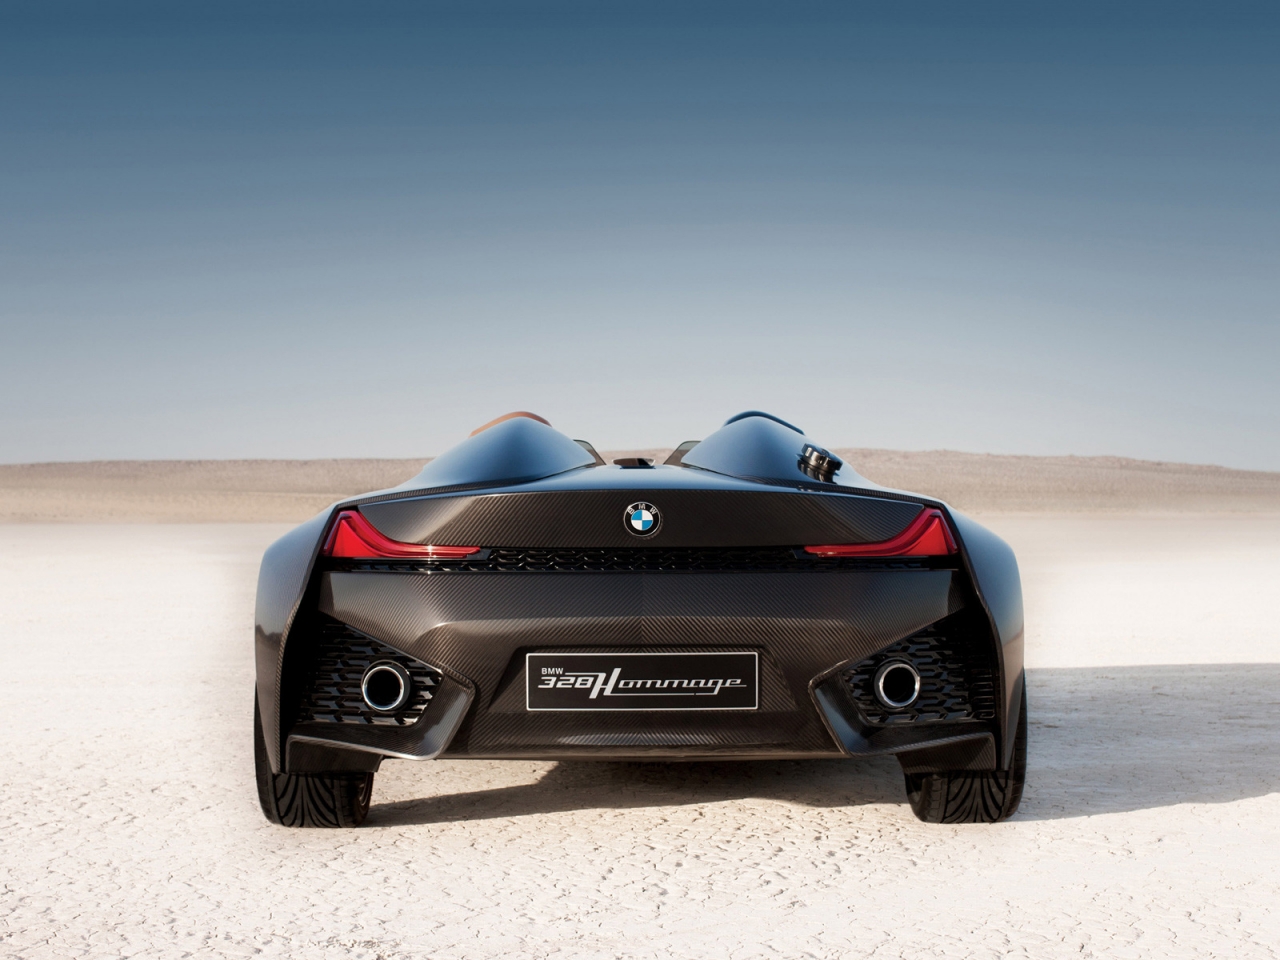 BMW 328 Hommage Rear for 1280 x 960 resolution